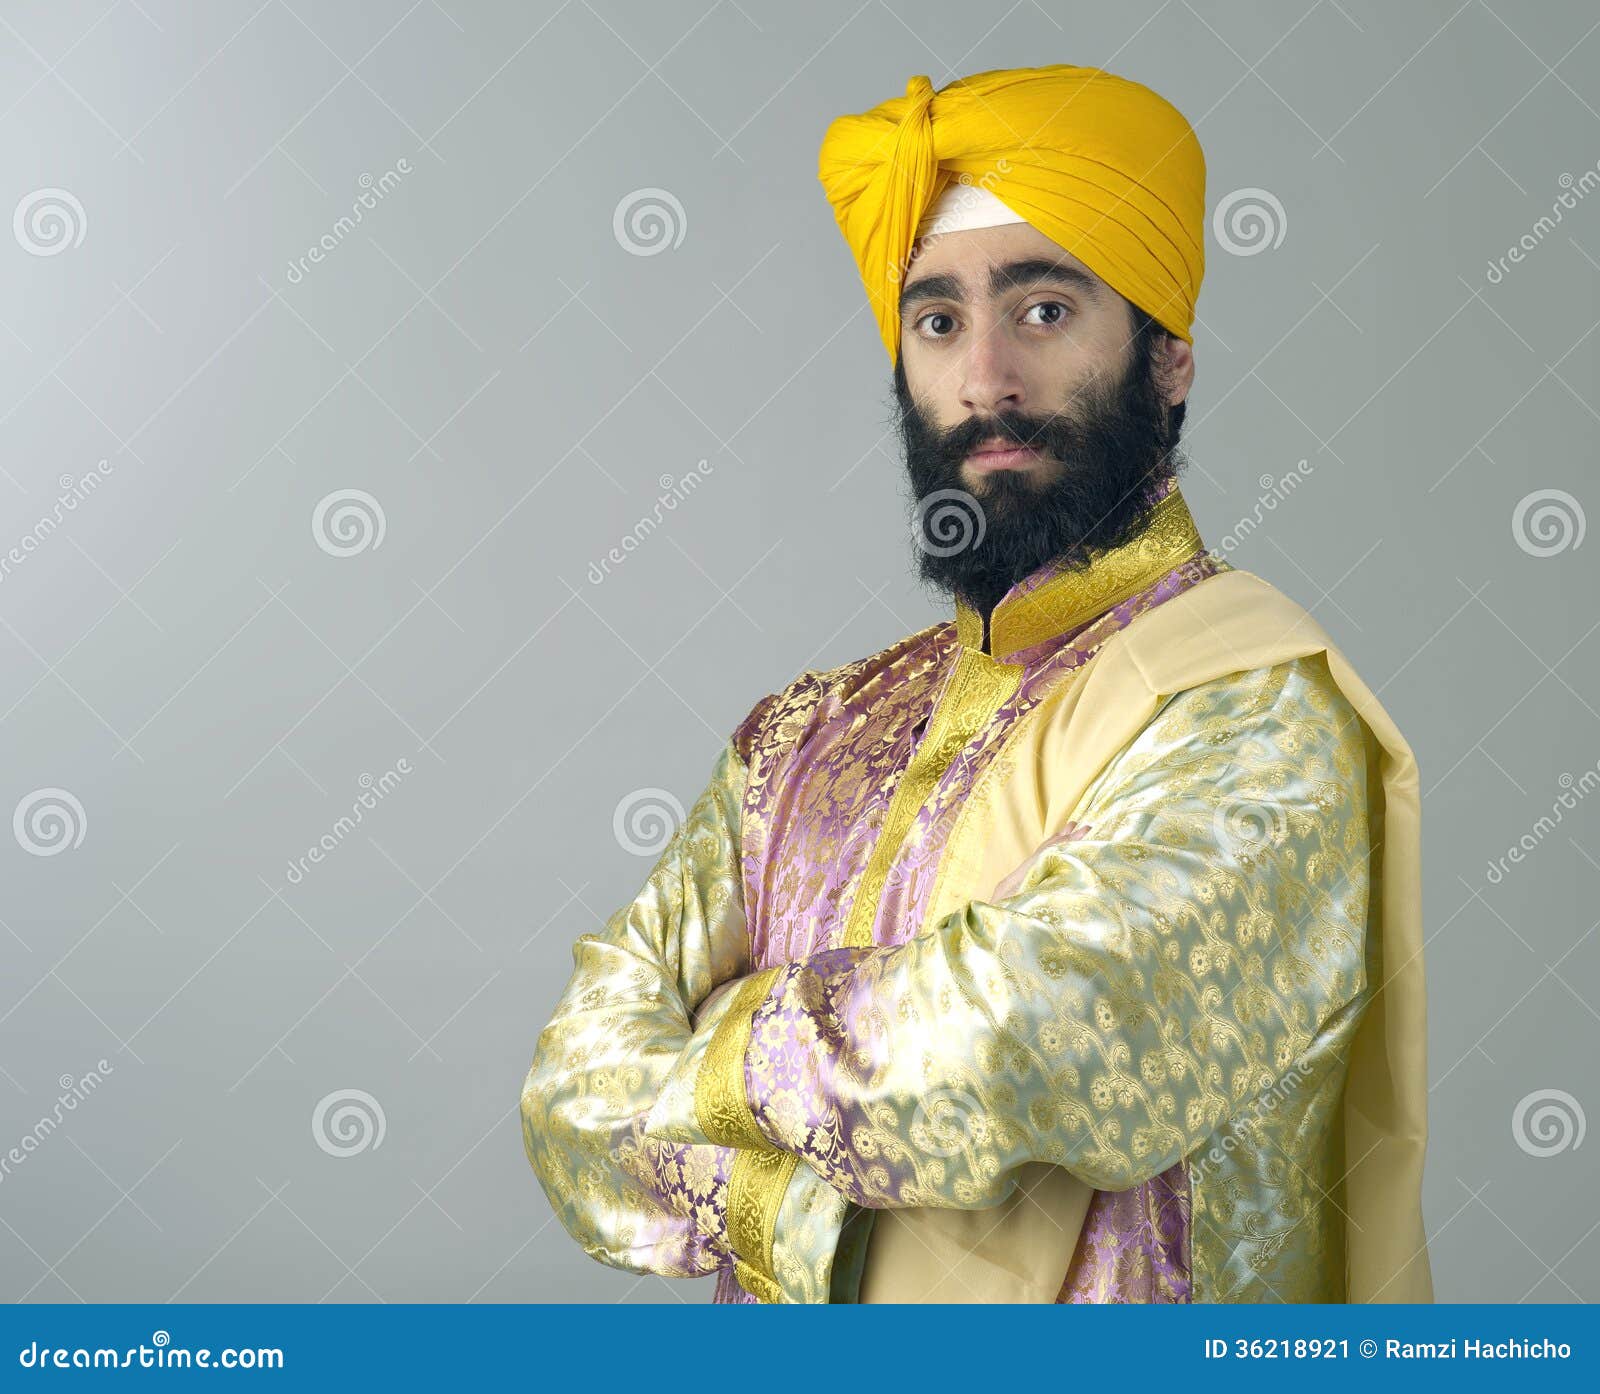 portrait of indian sikh man with bushy beard with his arms crossed